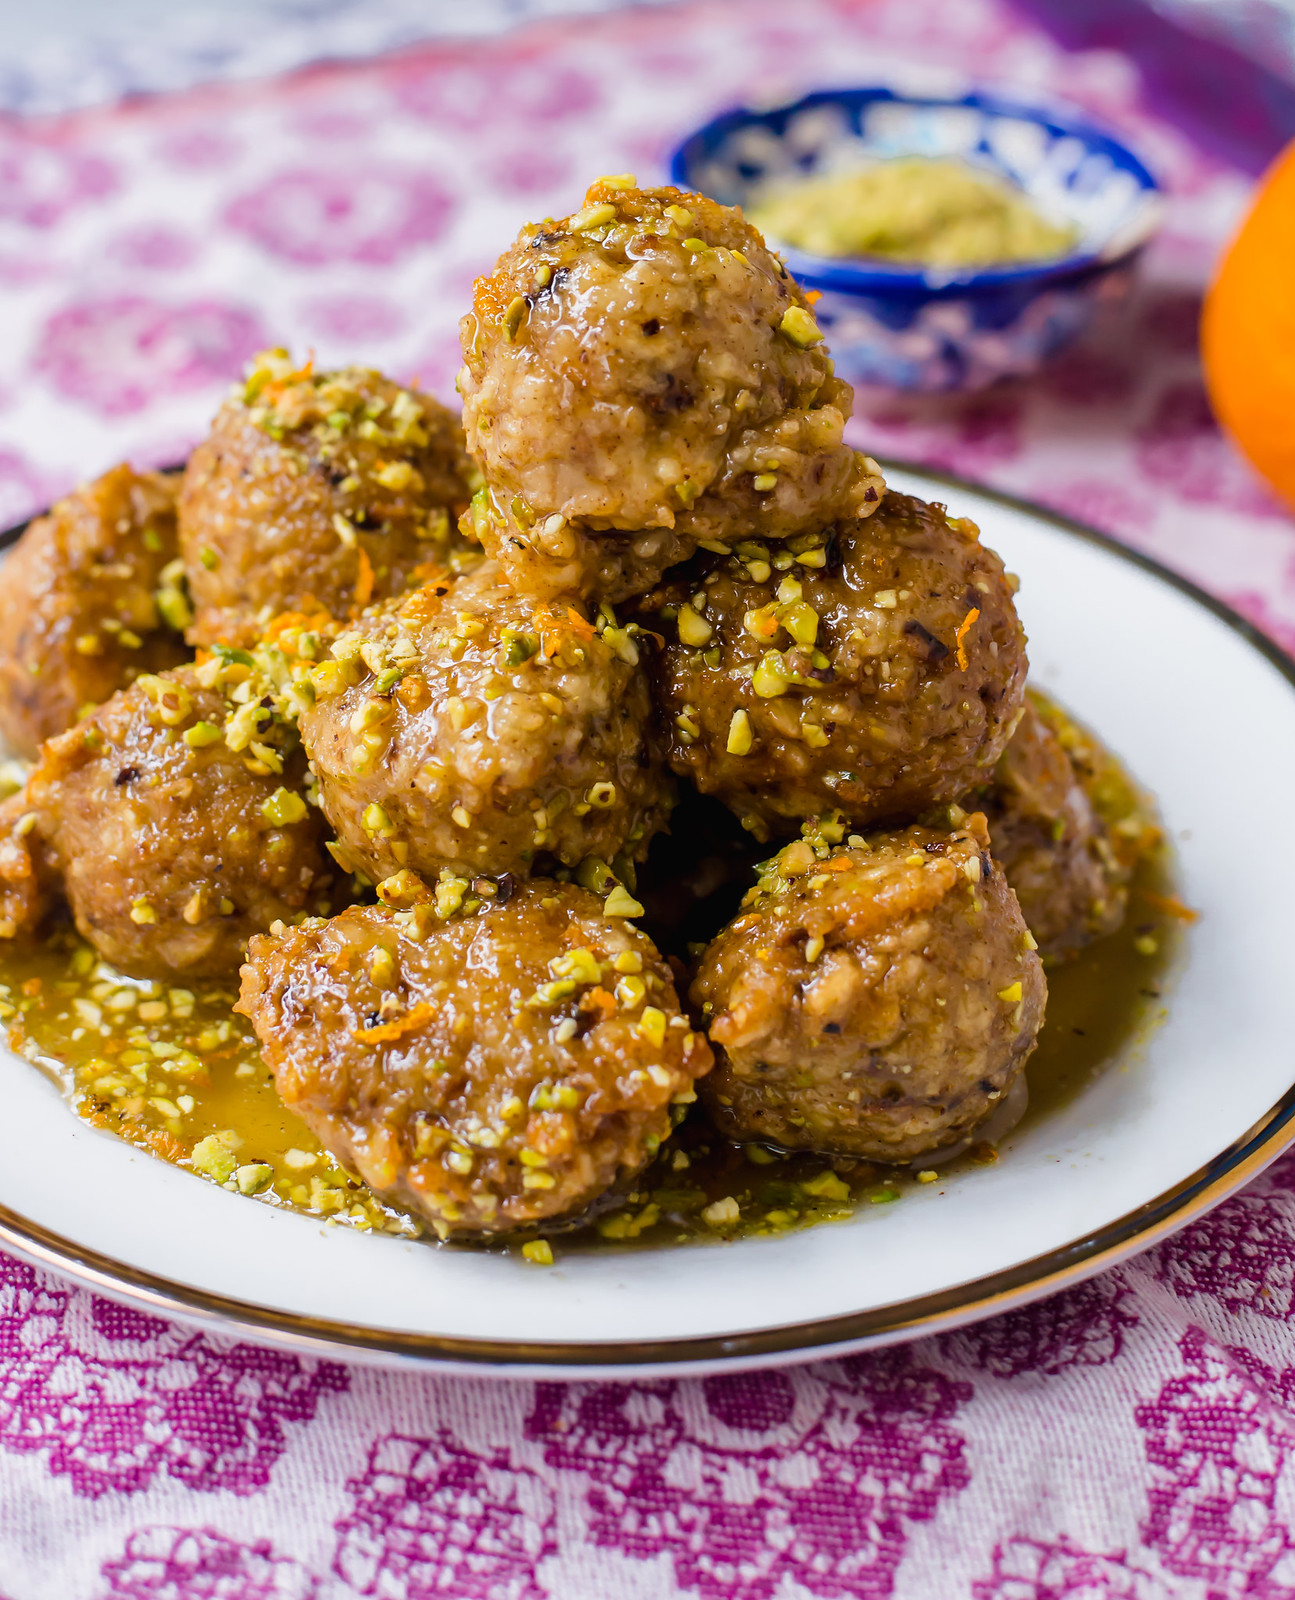 Baklava Bimuelos are a Sephardic Matzo Donuts that are gently fried and doused in a rose water syrup and garnished with pistachios.